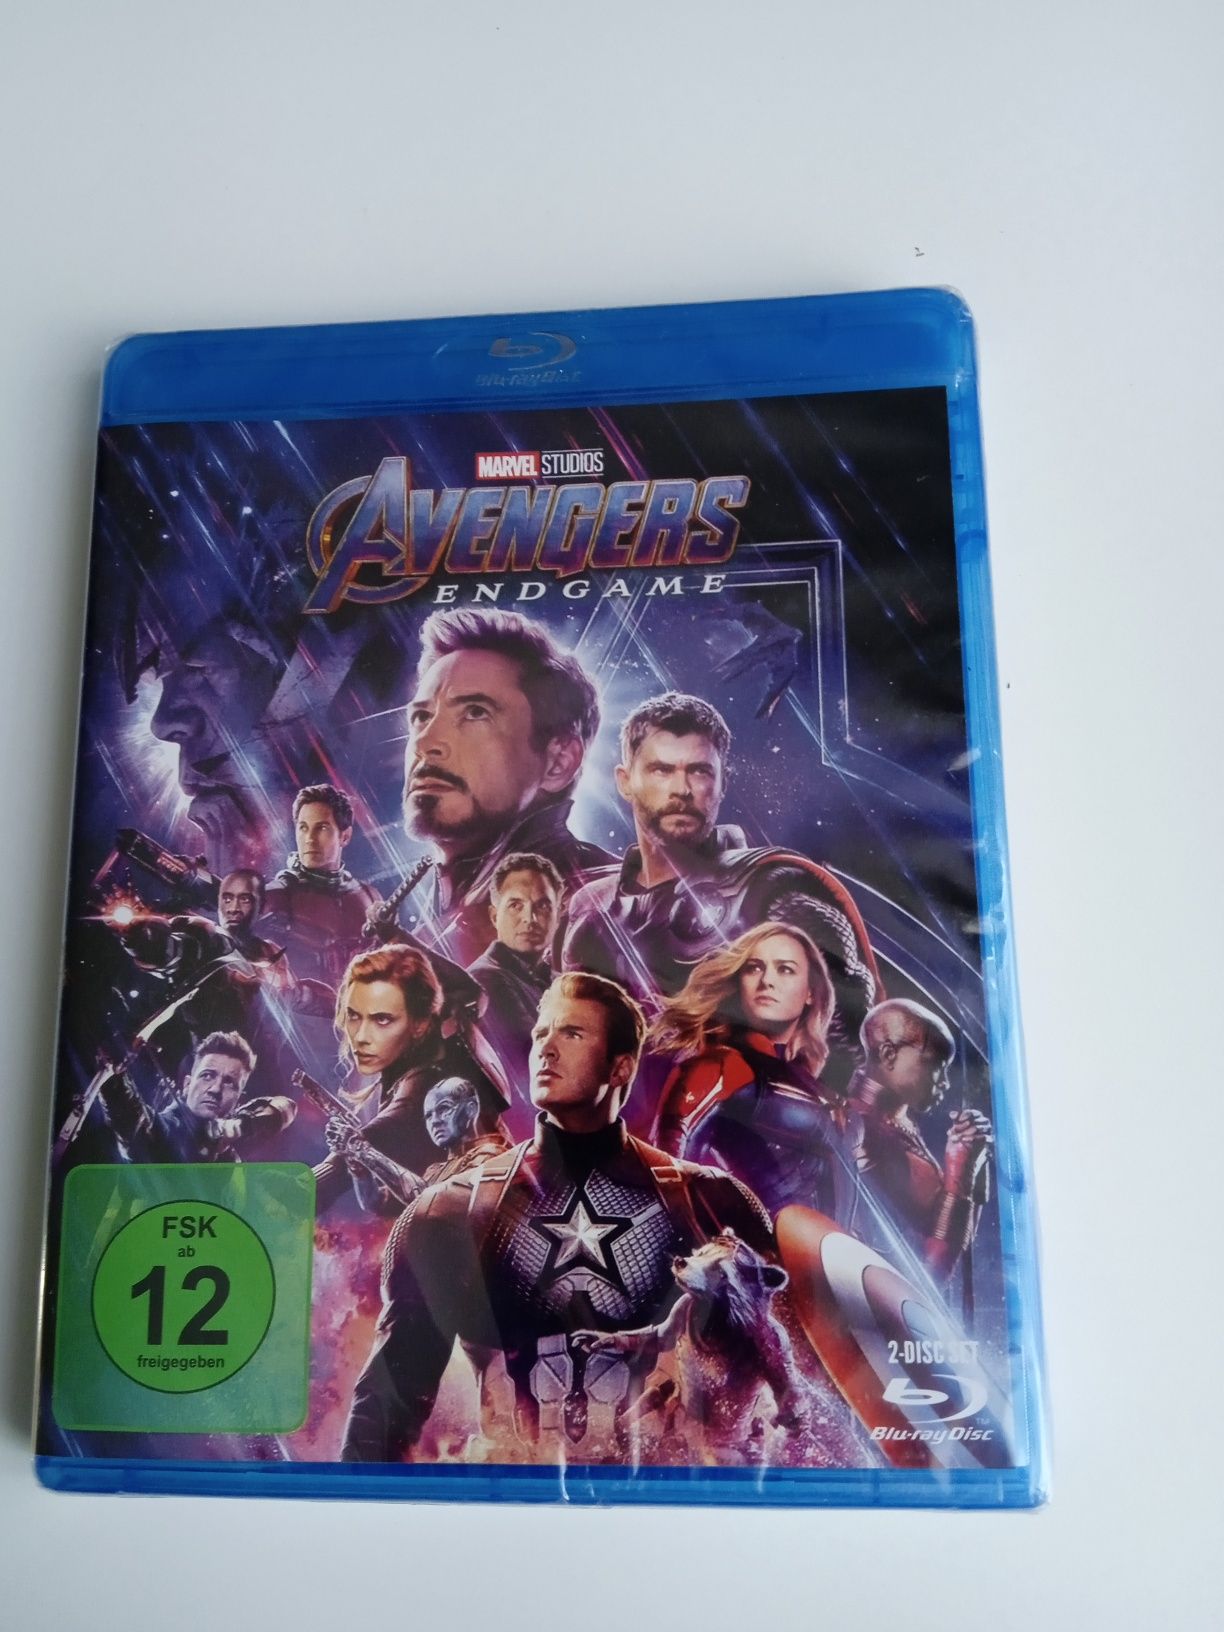 Blu-ray Avengers end game eng.